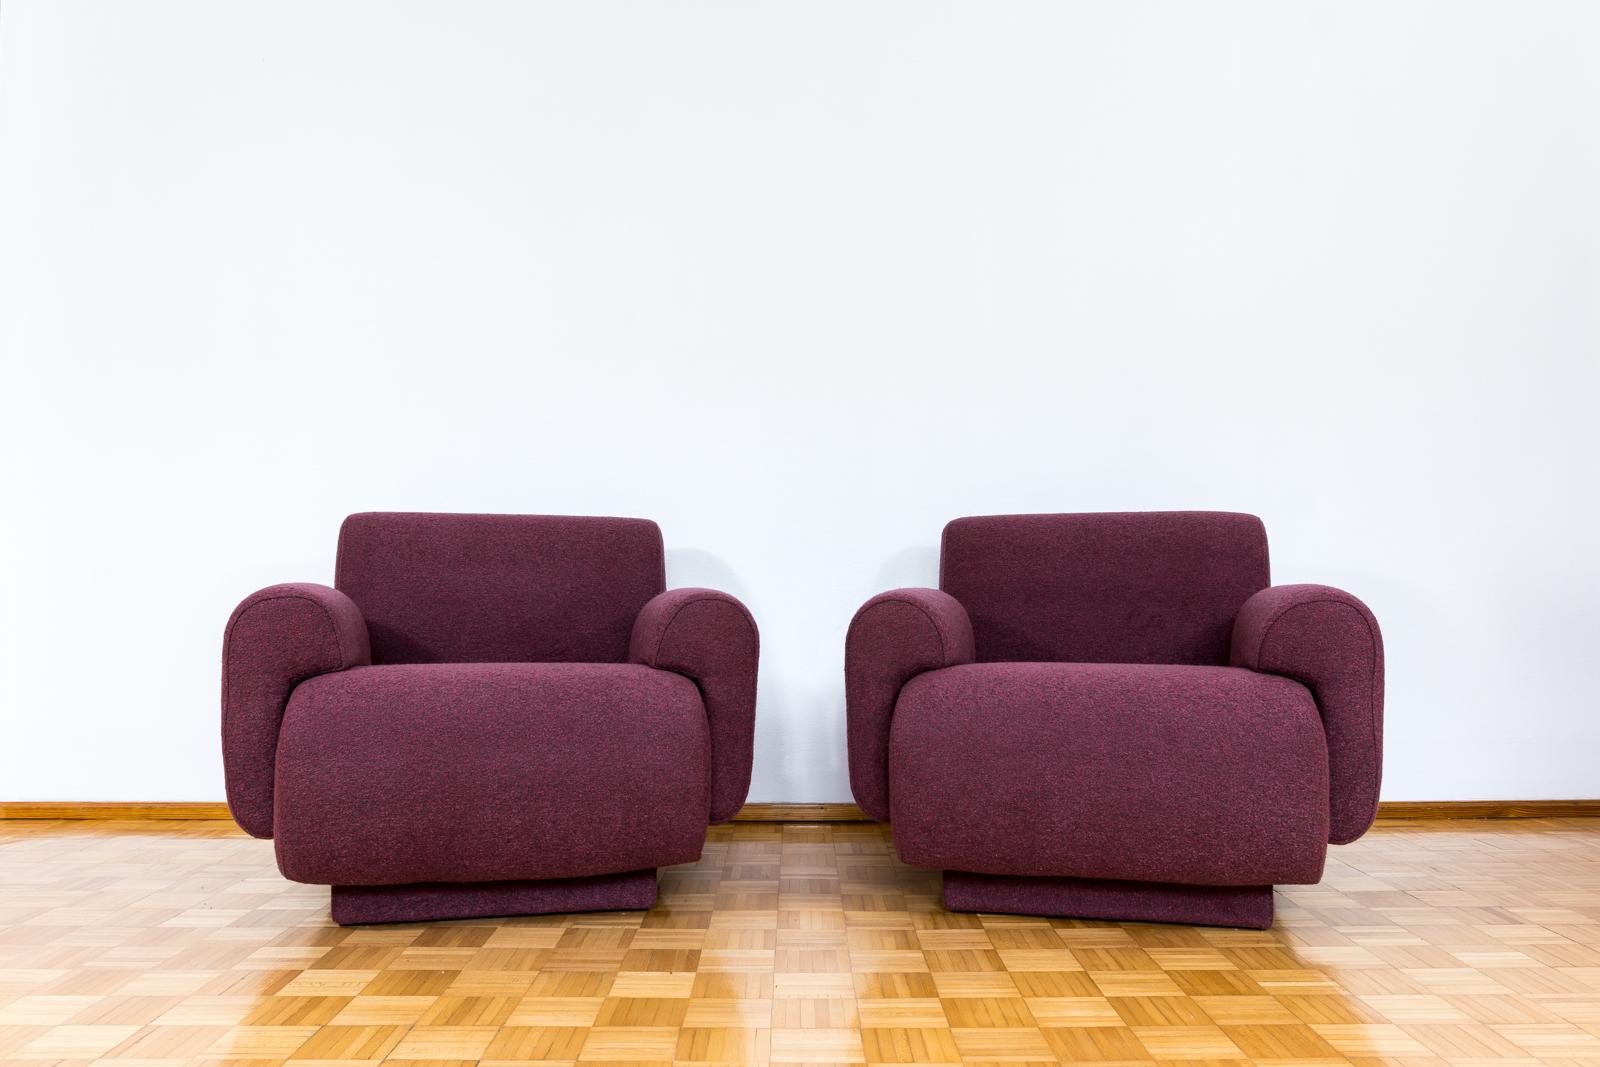 Space Age Pair Of Purple Modular Lounge Chairs, 1970, Germany